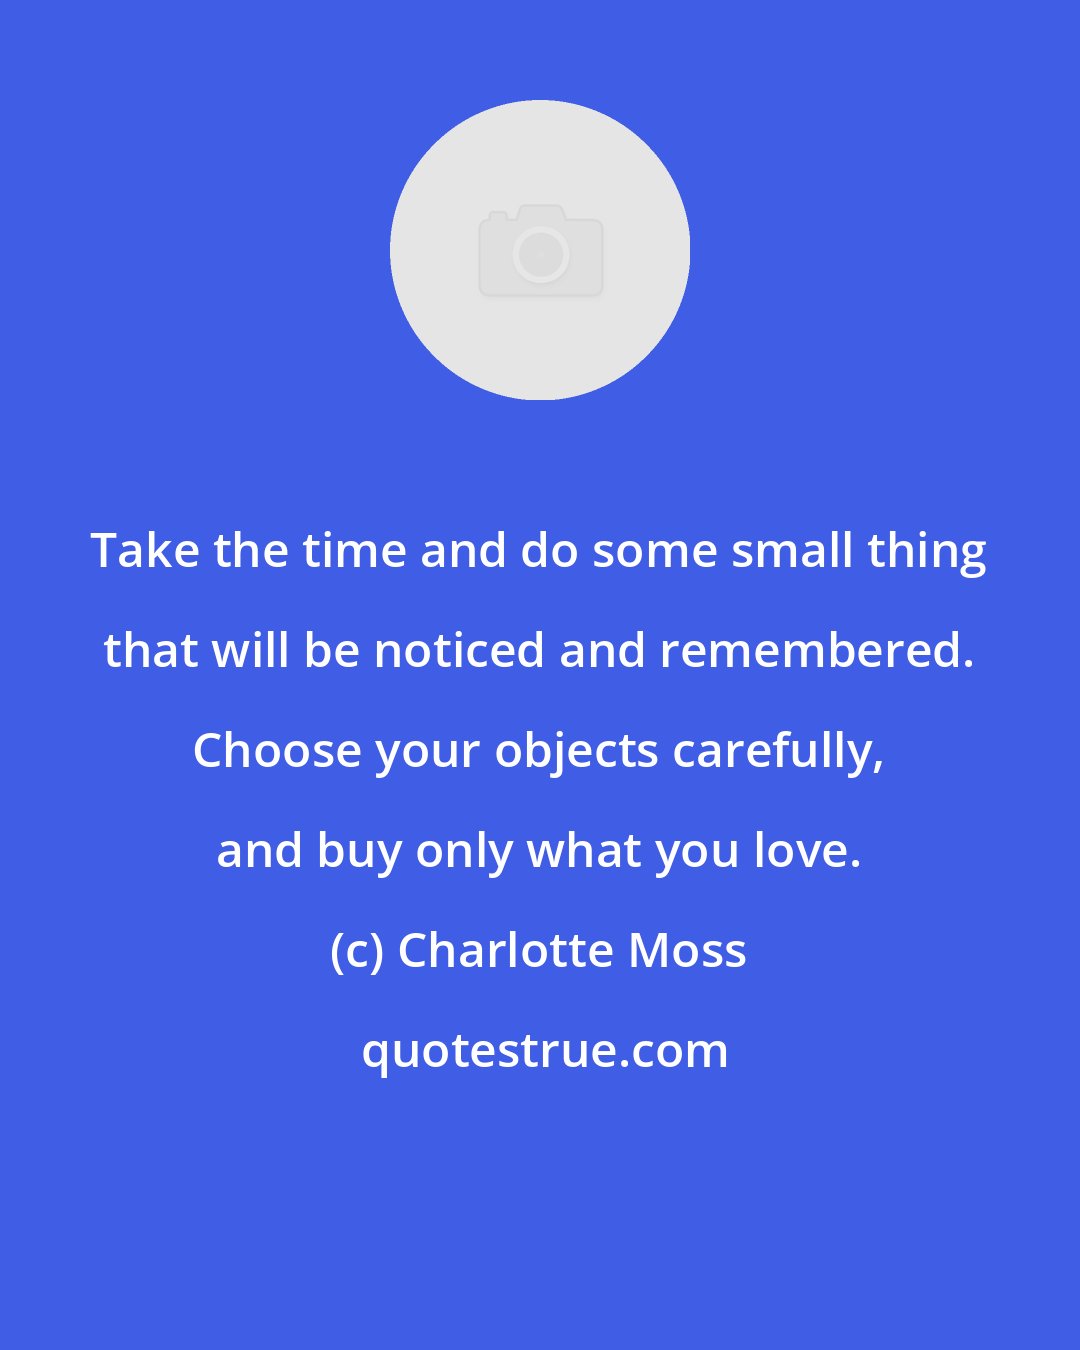 Charlotte Moss: Take the time and do some small thing that will be noticed and remembered. Choose your objects carefully, and buy only what you love.